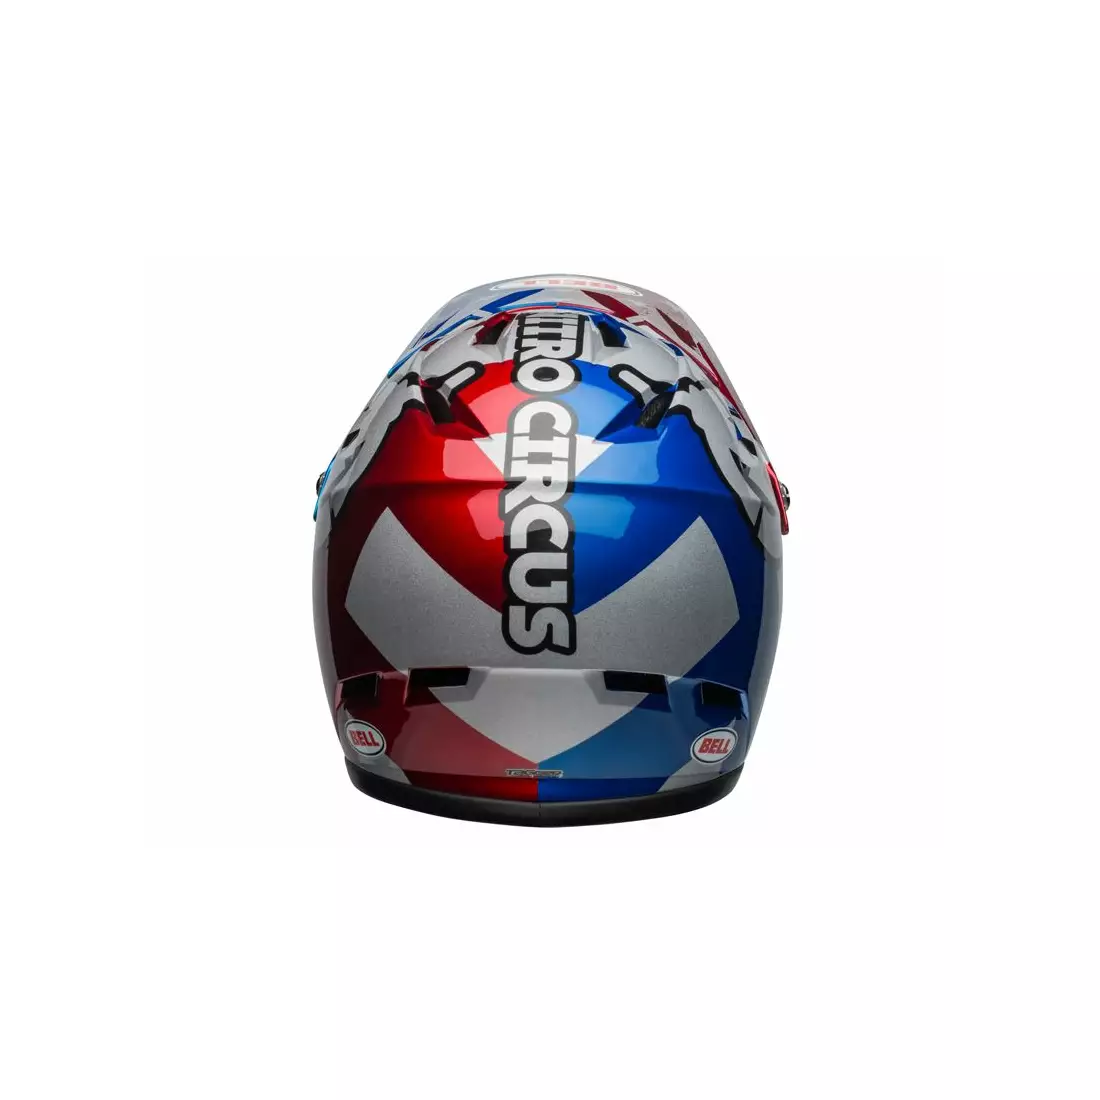 BELL SANCTION full face bicycle helmet, nitro circus gloss silver blue red